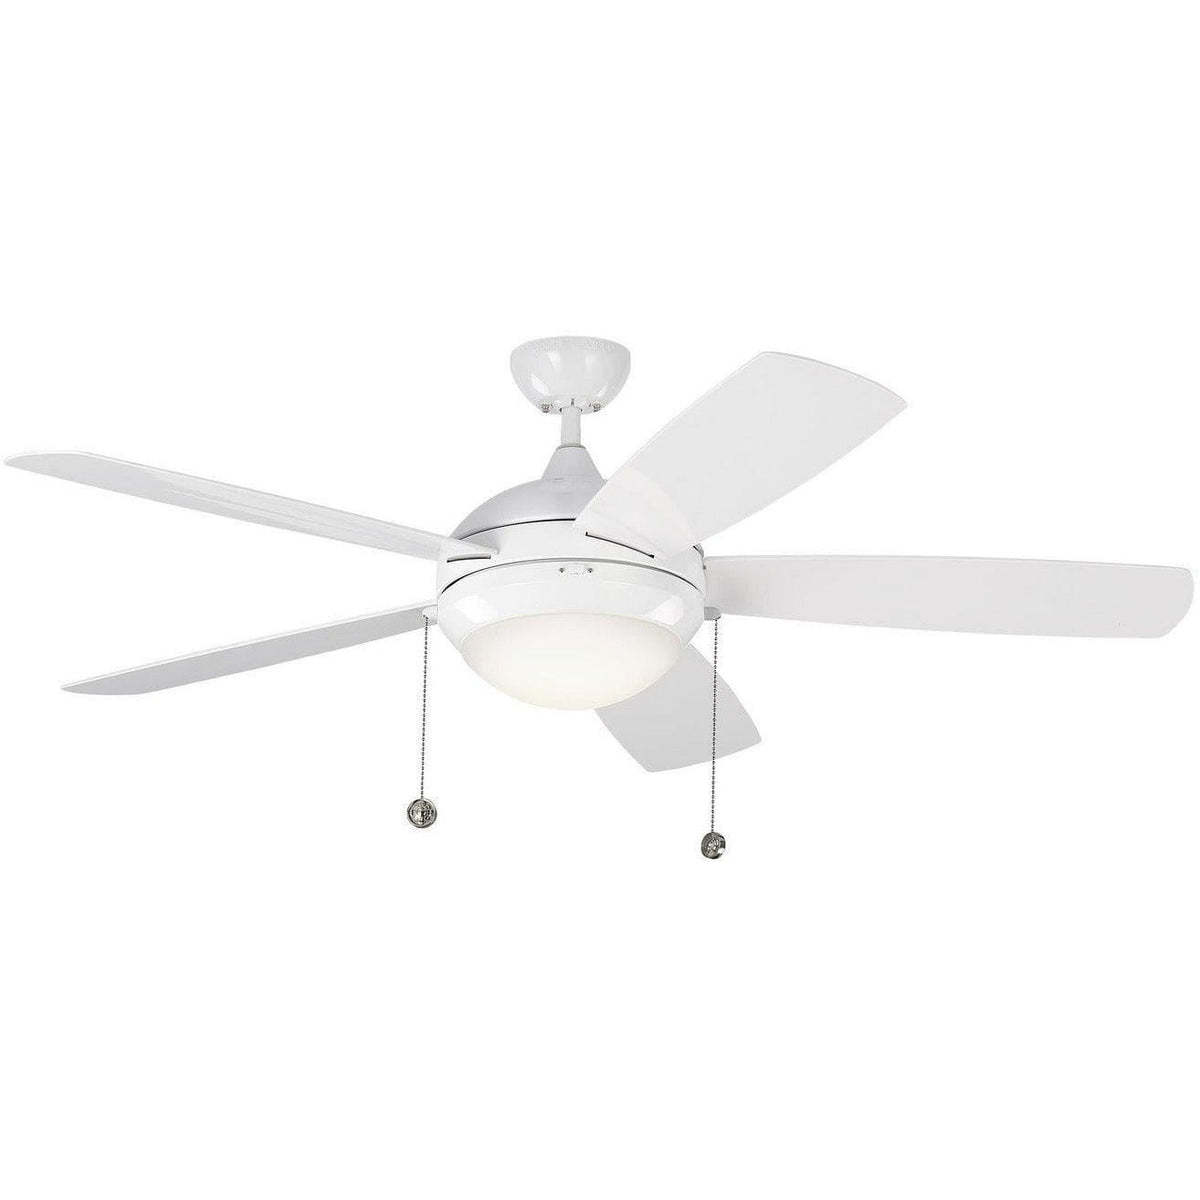 Visual Comfort Fan Collection - Discus Outdoor 52" Ceiling Fan - 5DIW52WHD | Montreal Lighting & Hardware